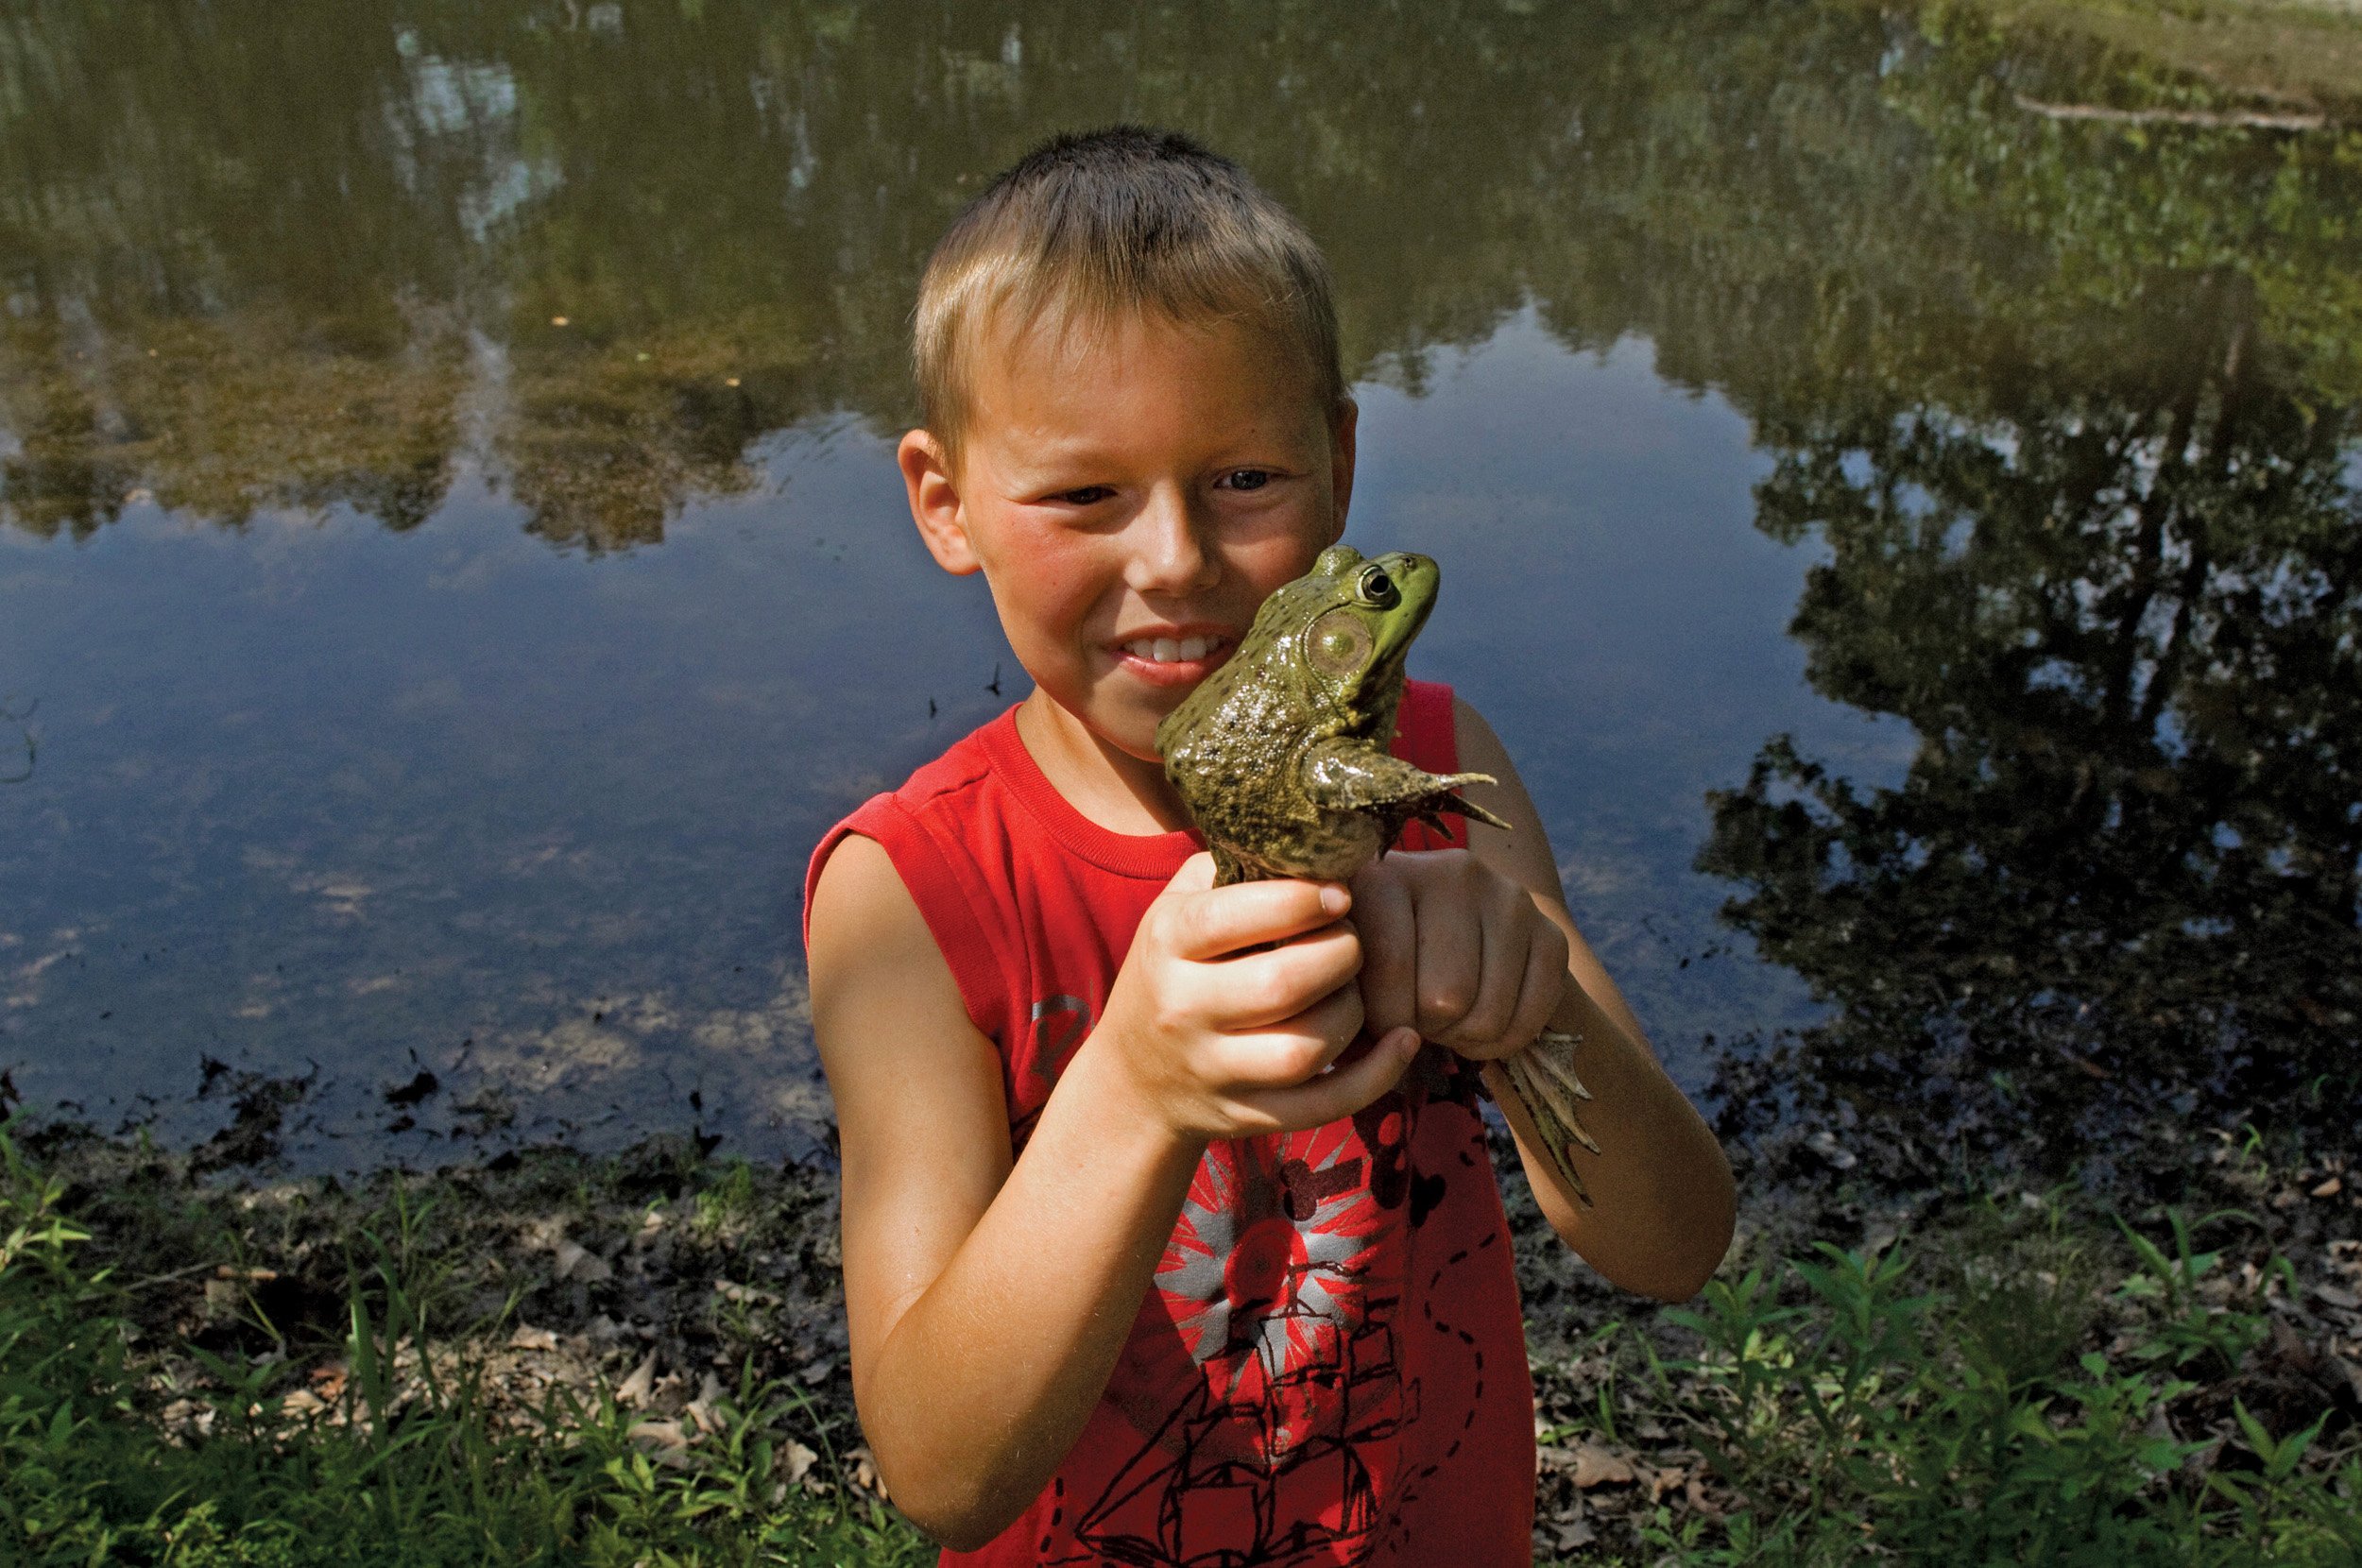  Boy holding a frog in front of a pond at a church camp. Timewell, IL. June, 2012 